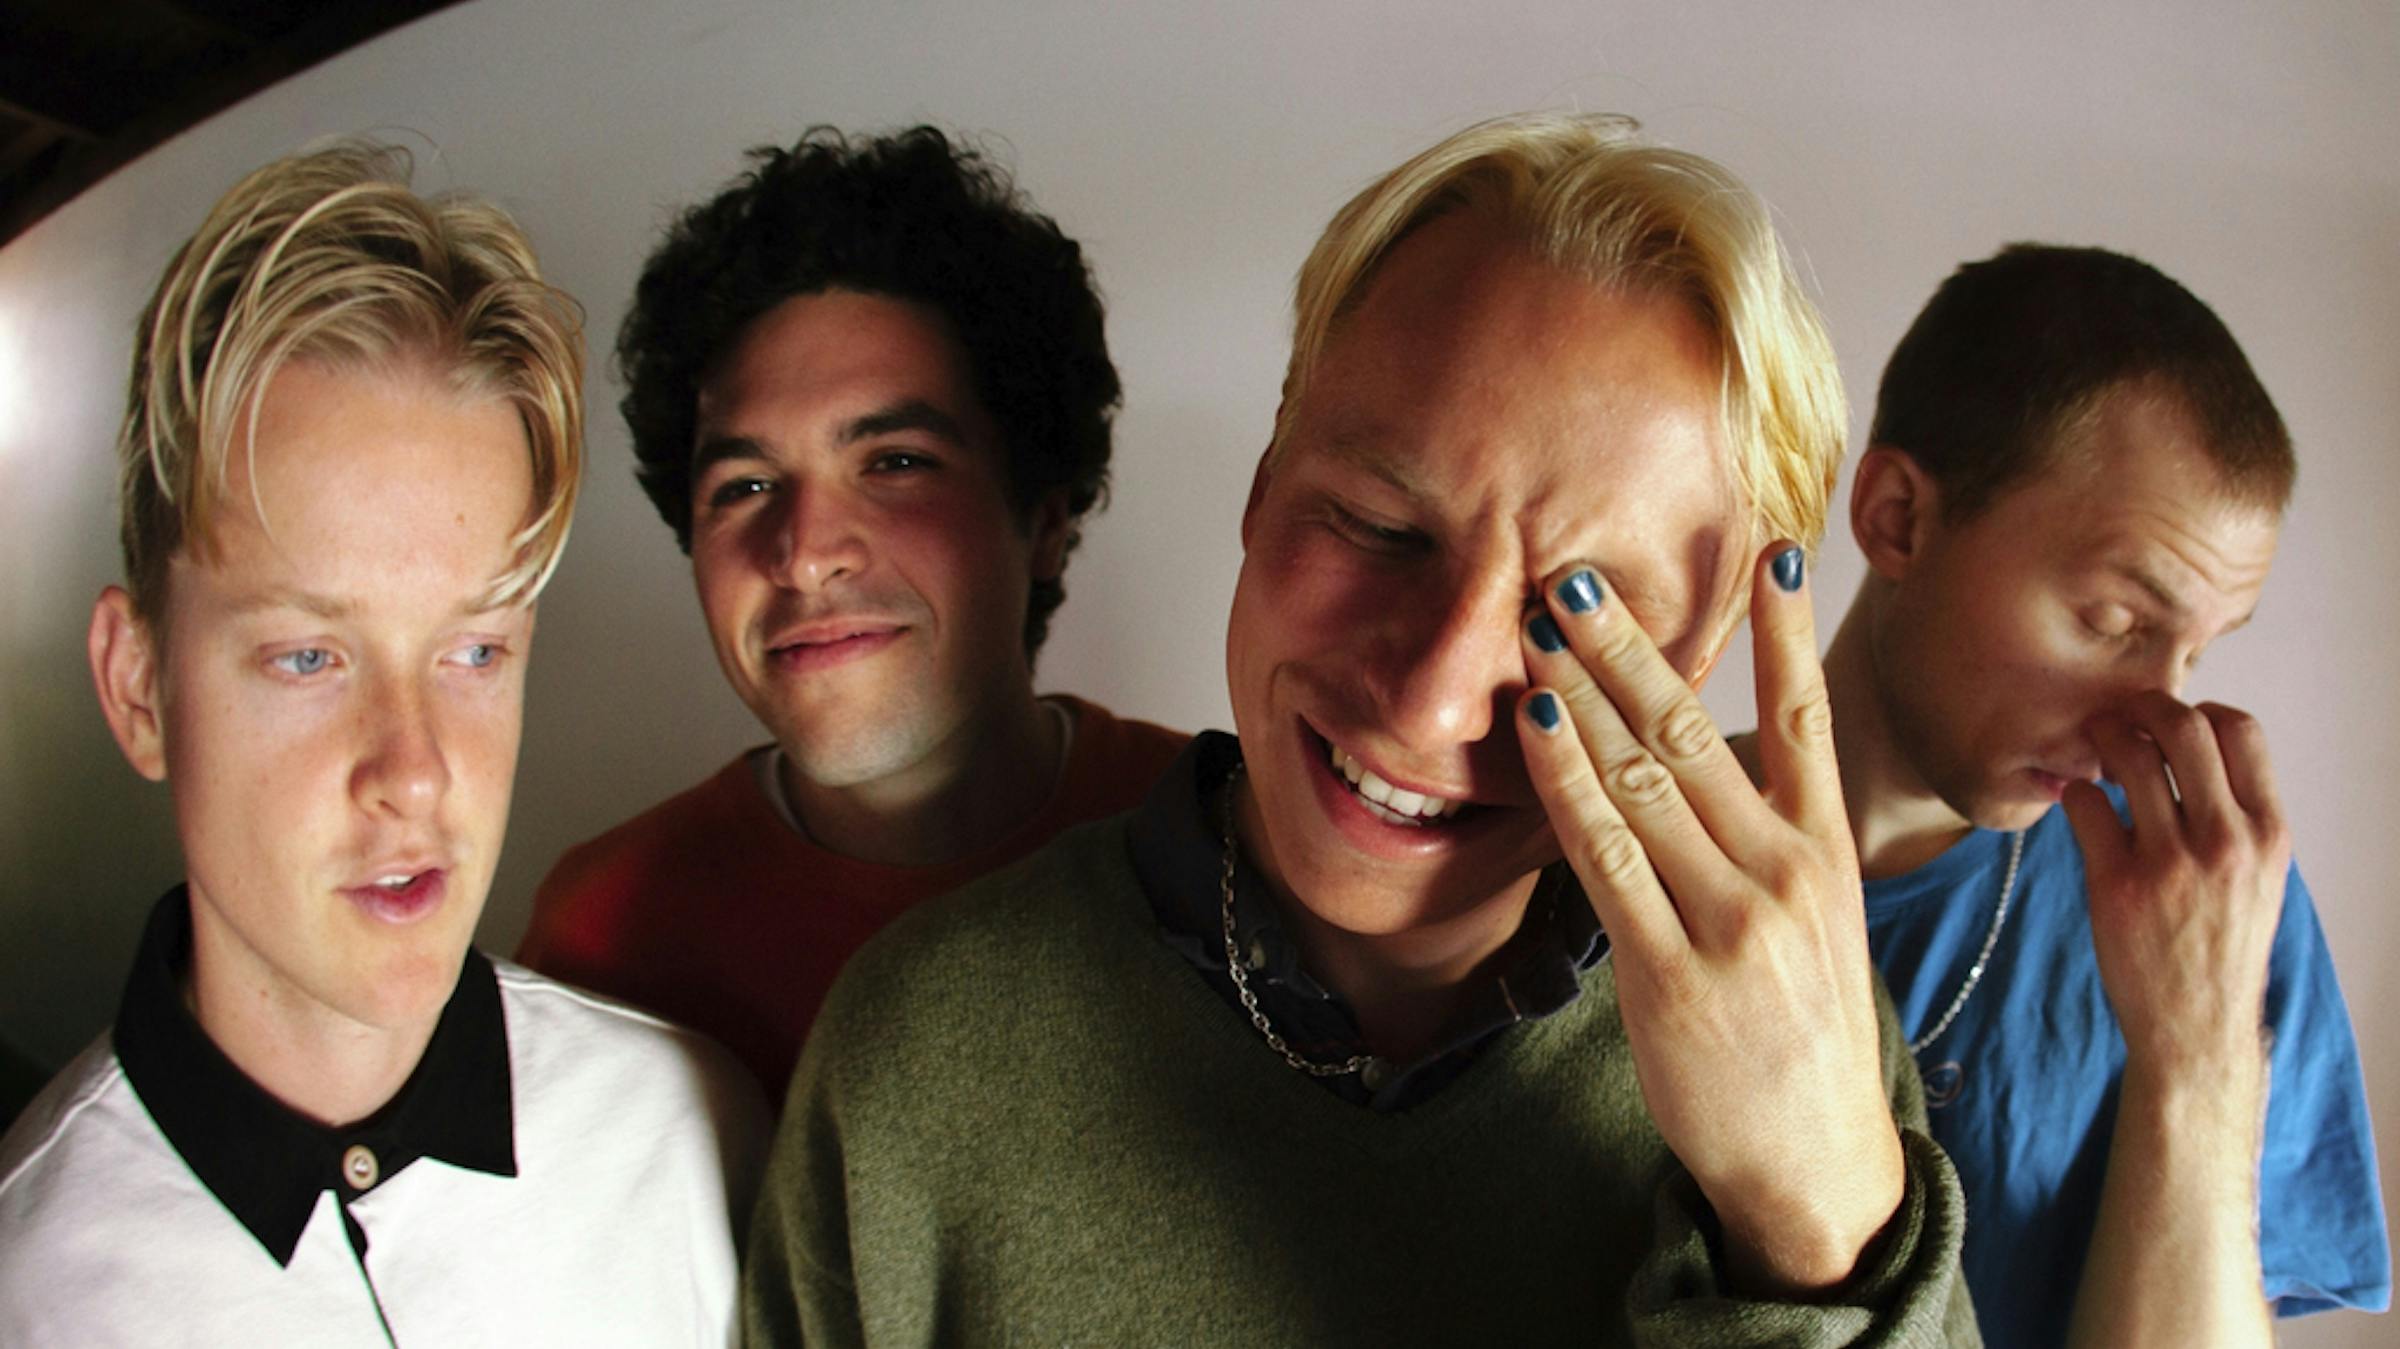 SWMRS' 13 Favorite Tracks To Skate To